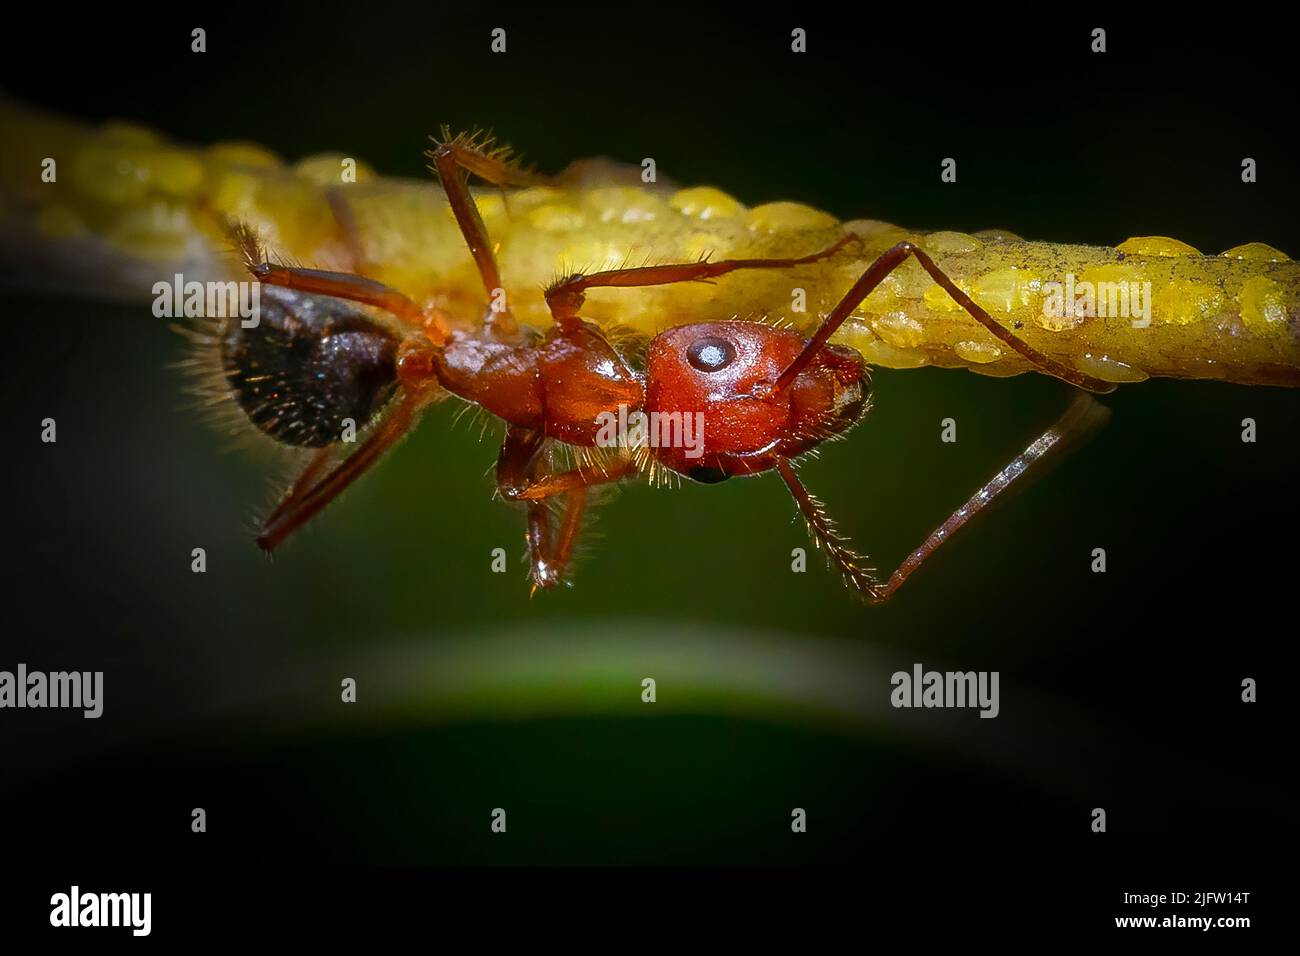 A carpenter ant tends to it's flock of aphid like insects called scale insects. Stock Photo